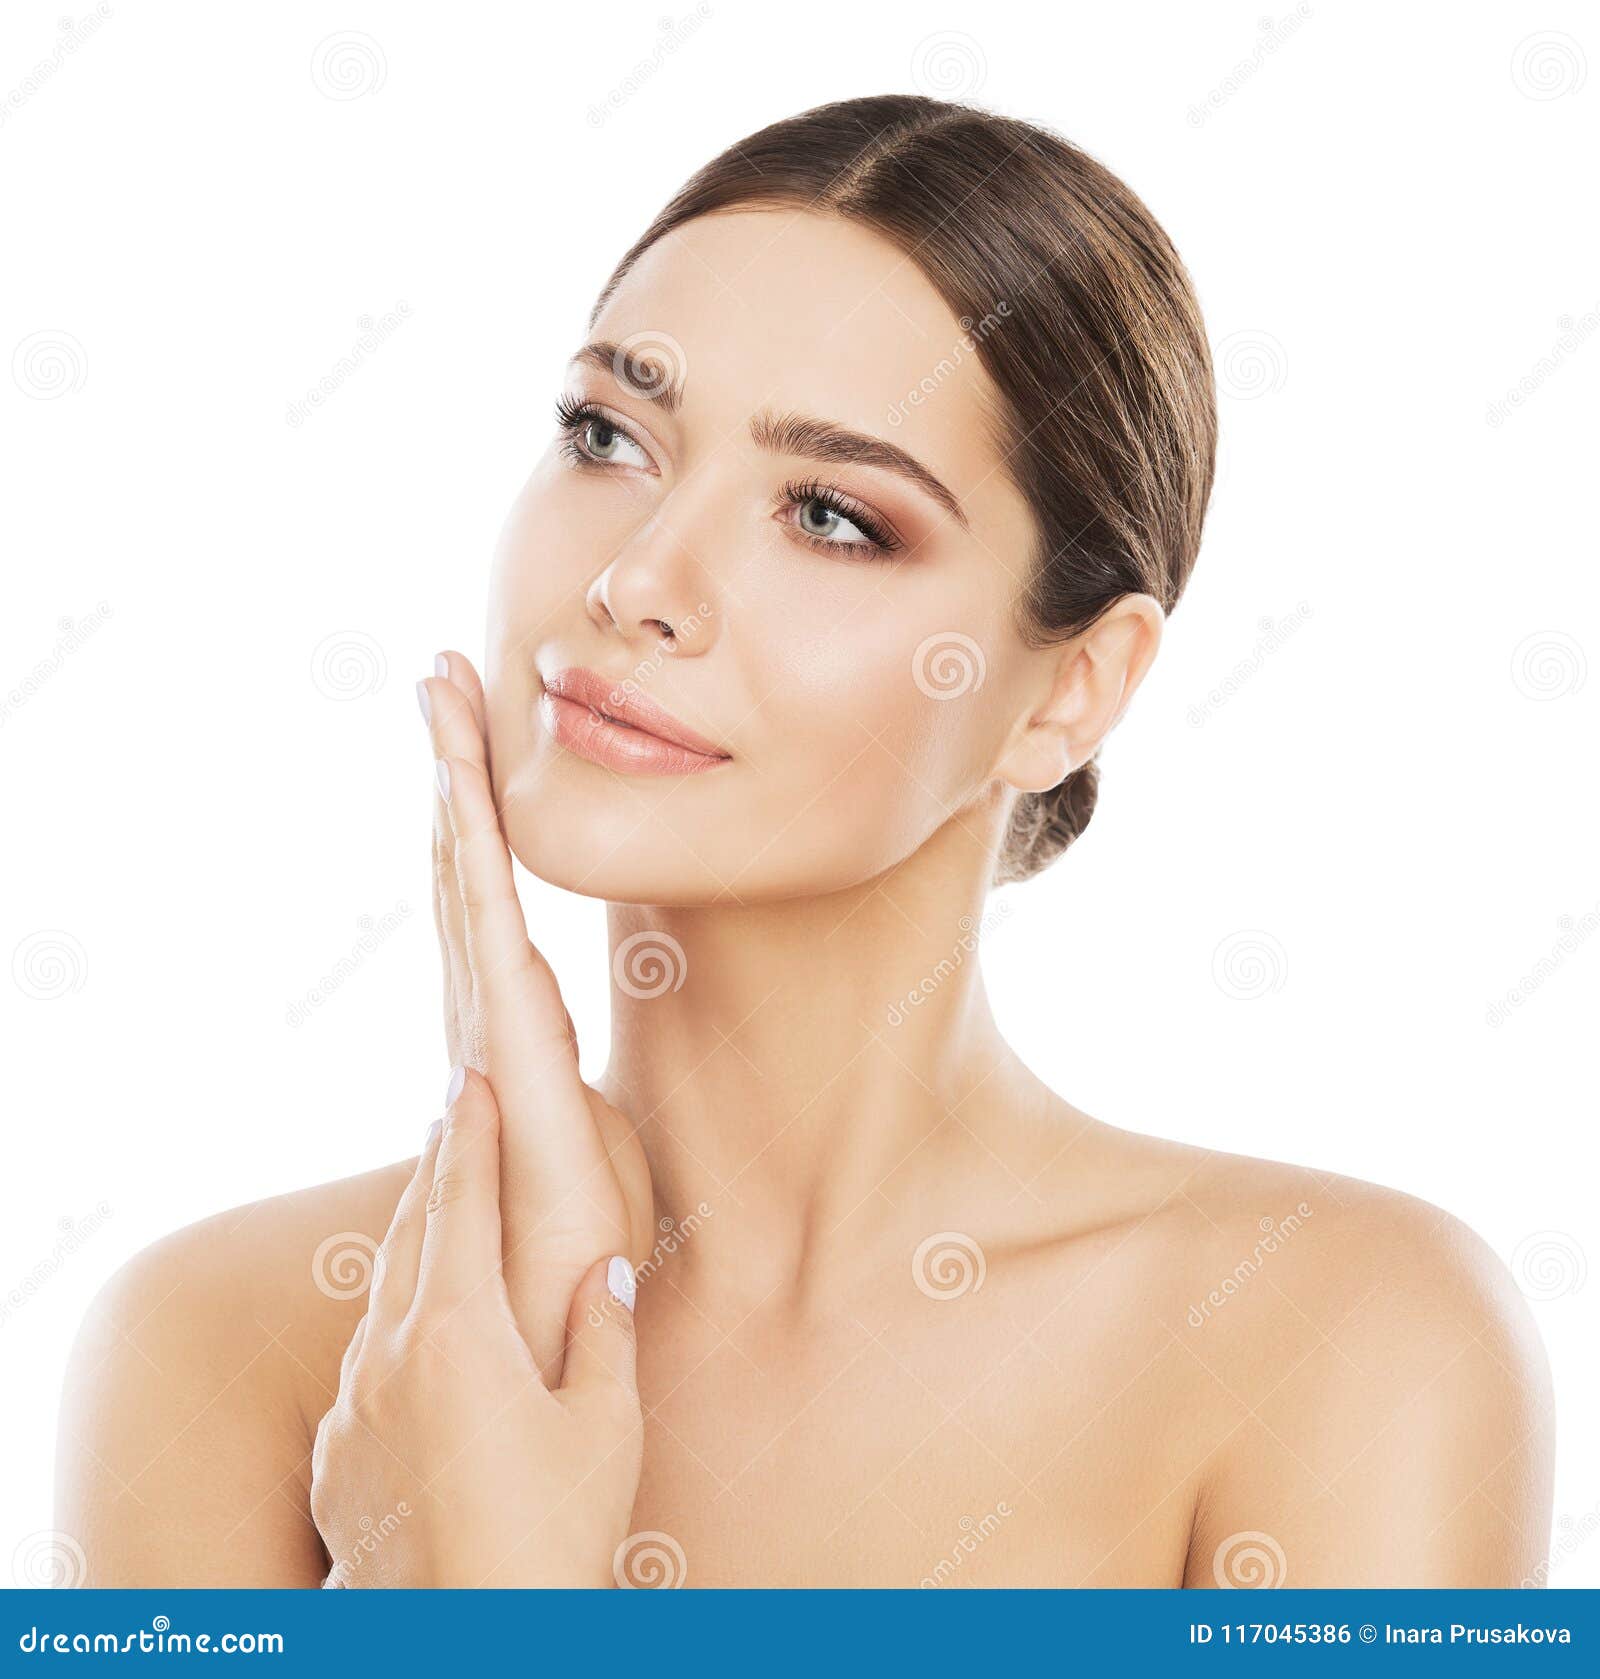 face beauty skin care, woman natural make up, hand on cheek